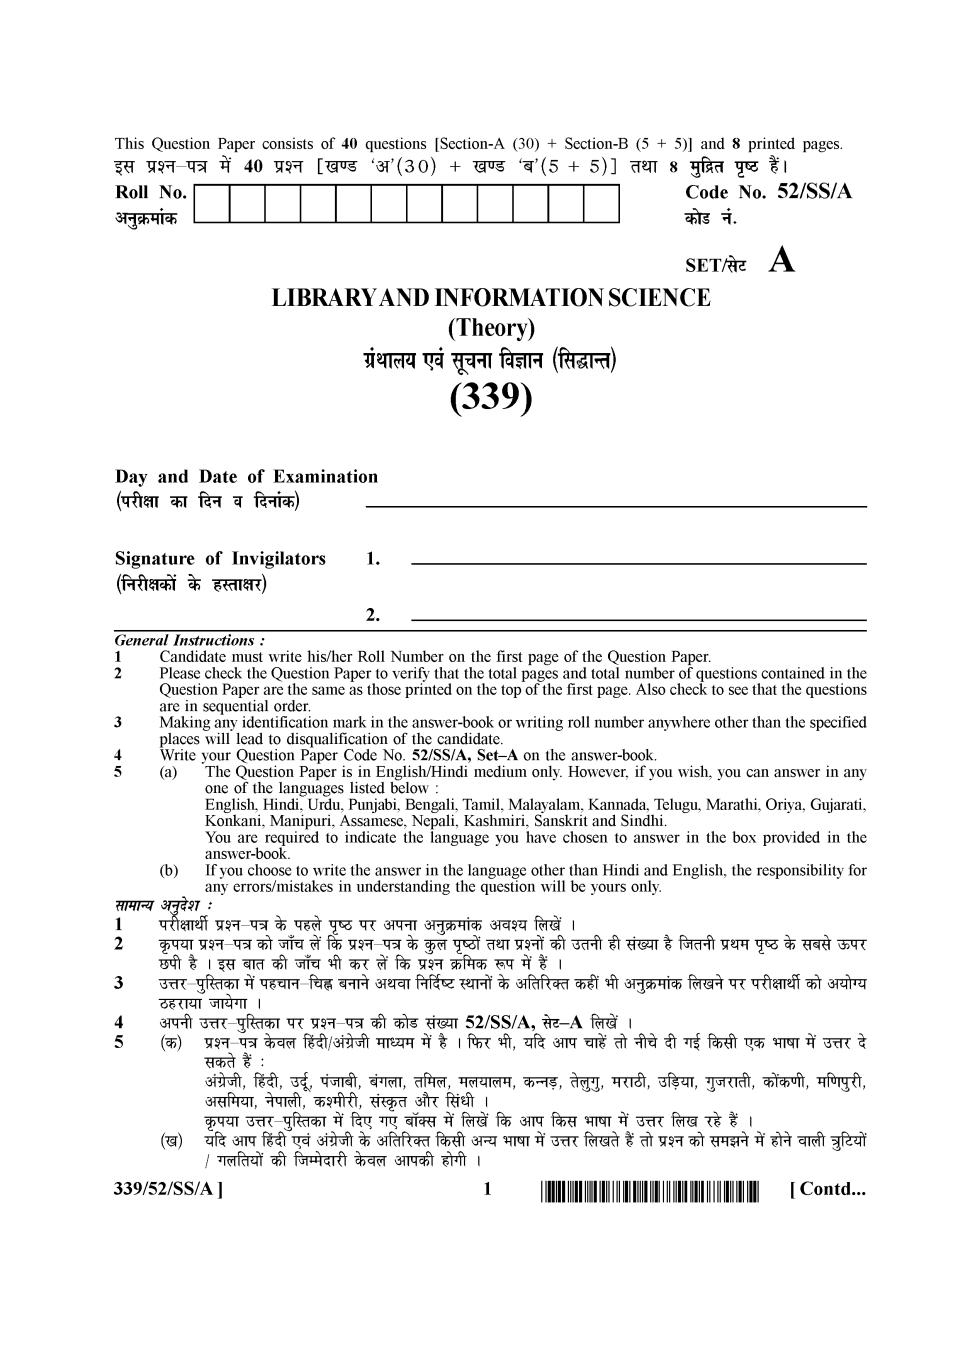 NIOS Class 12 Question Paper Apr 2016 - Library And Information Science - Page 1